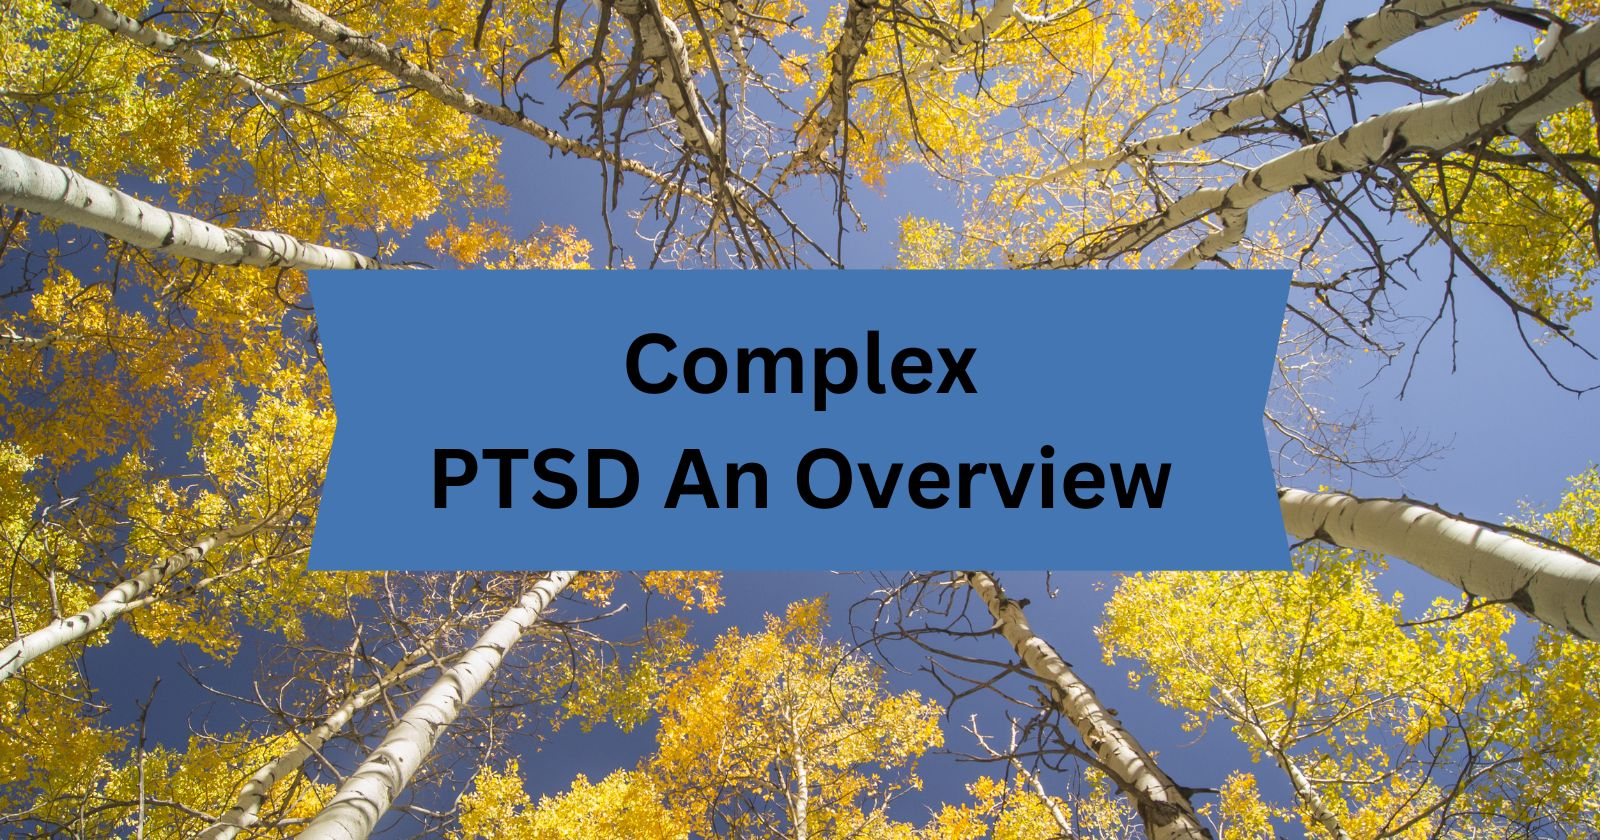 Complex Post-Traumatic Stress Disorder: An Overview

Trees picture in the background